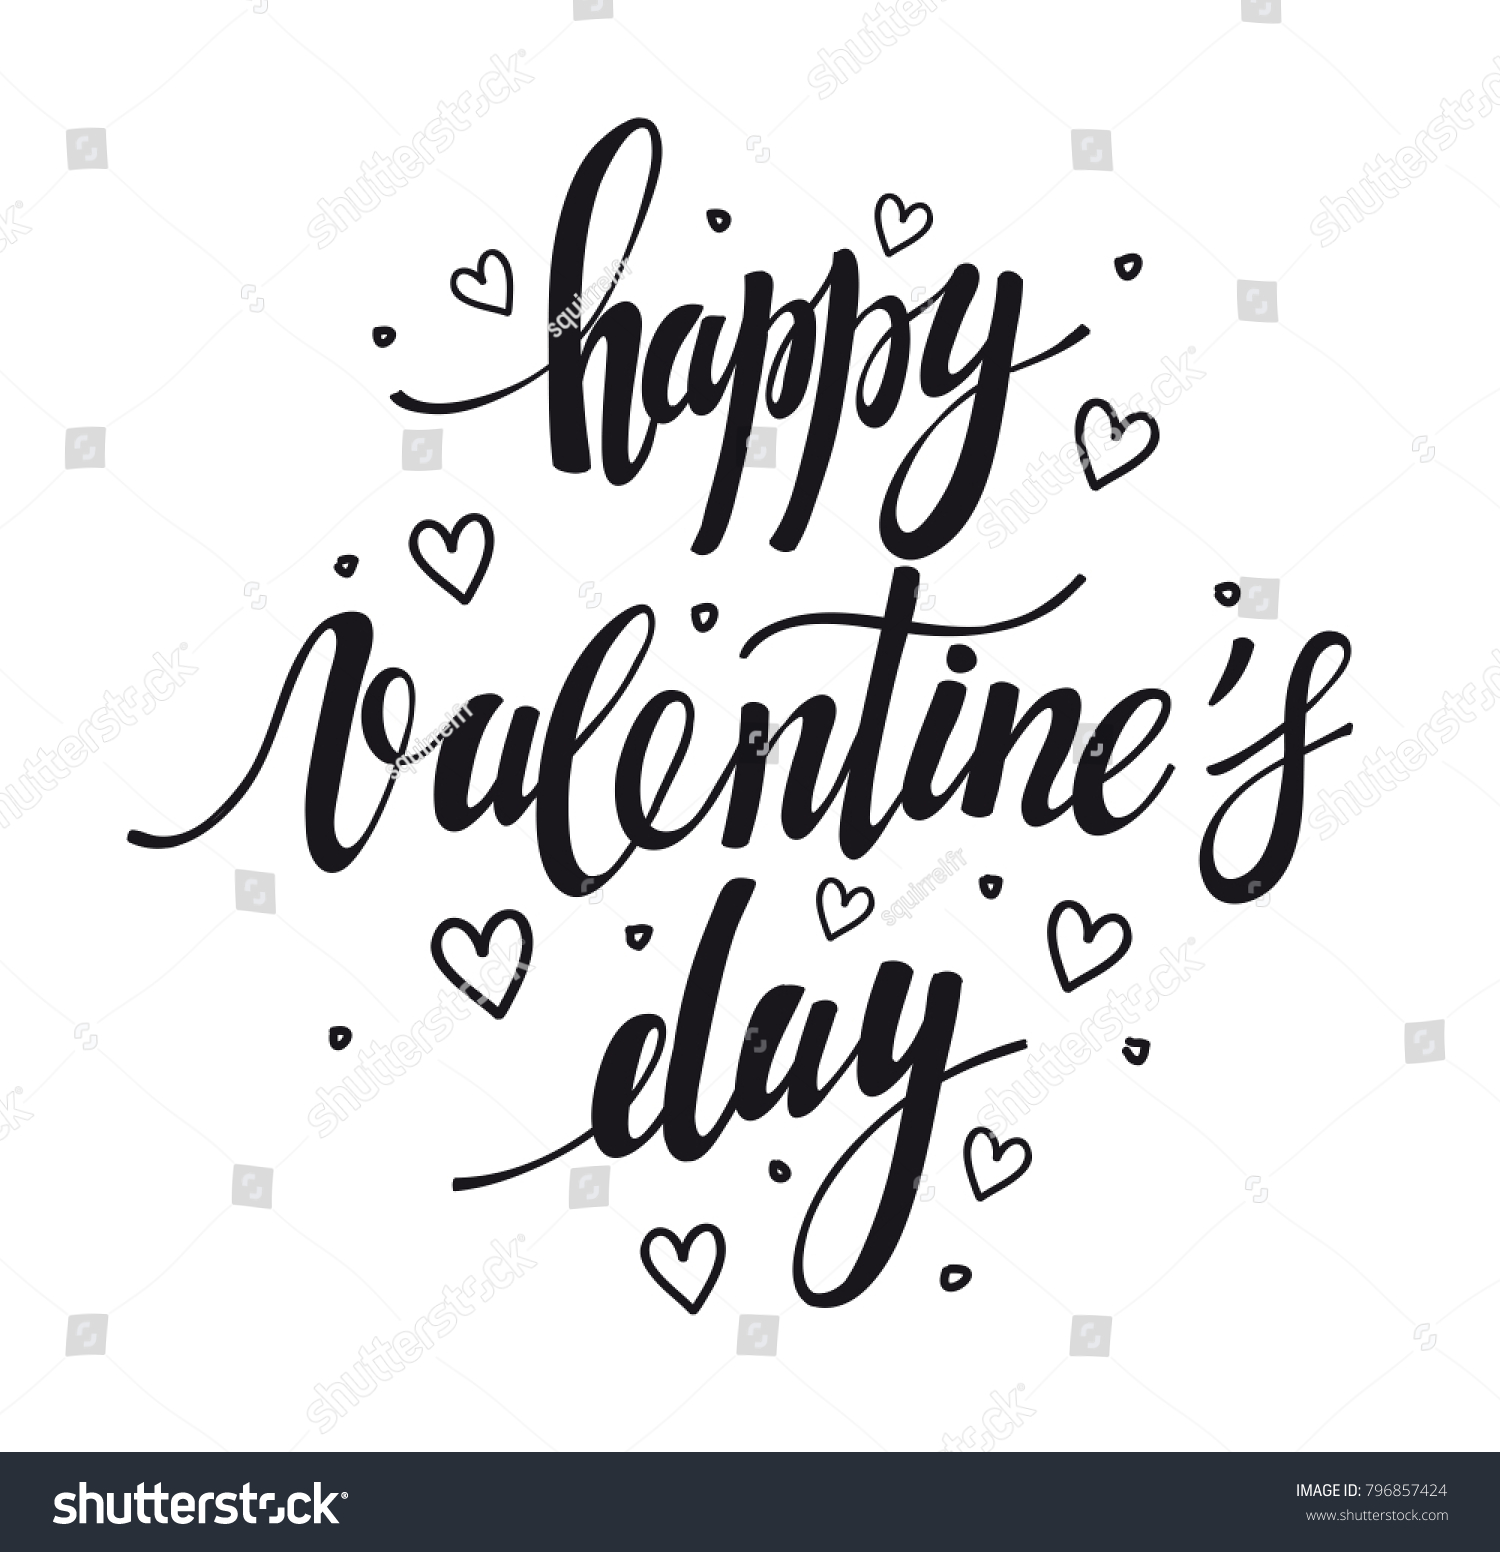 happy Valentine's day. Hand drawn brush pen lettering isolated on white background. design for holiday greeting card and invitation of the  Valentine's day and Happy love day #796857424